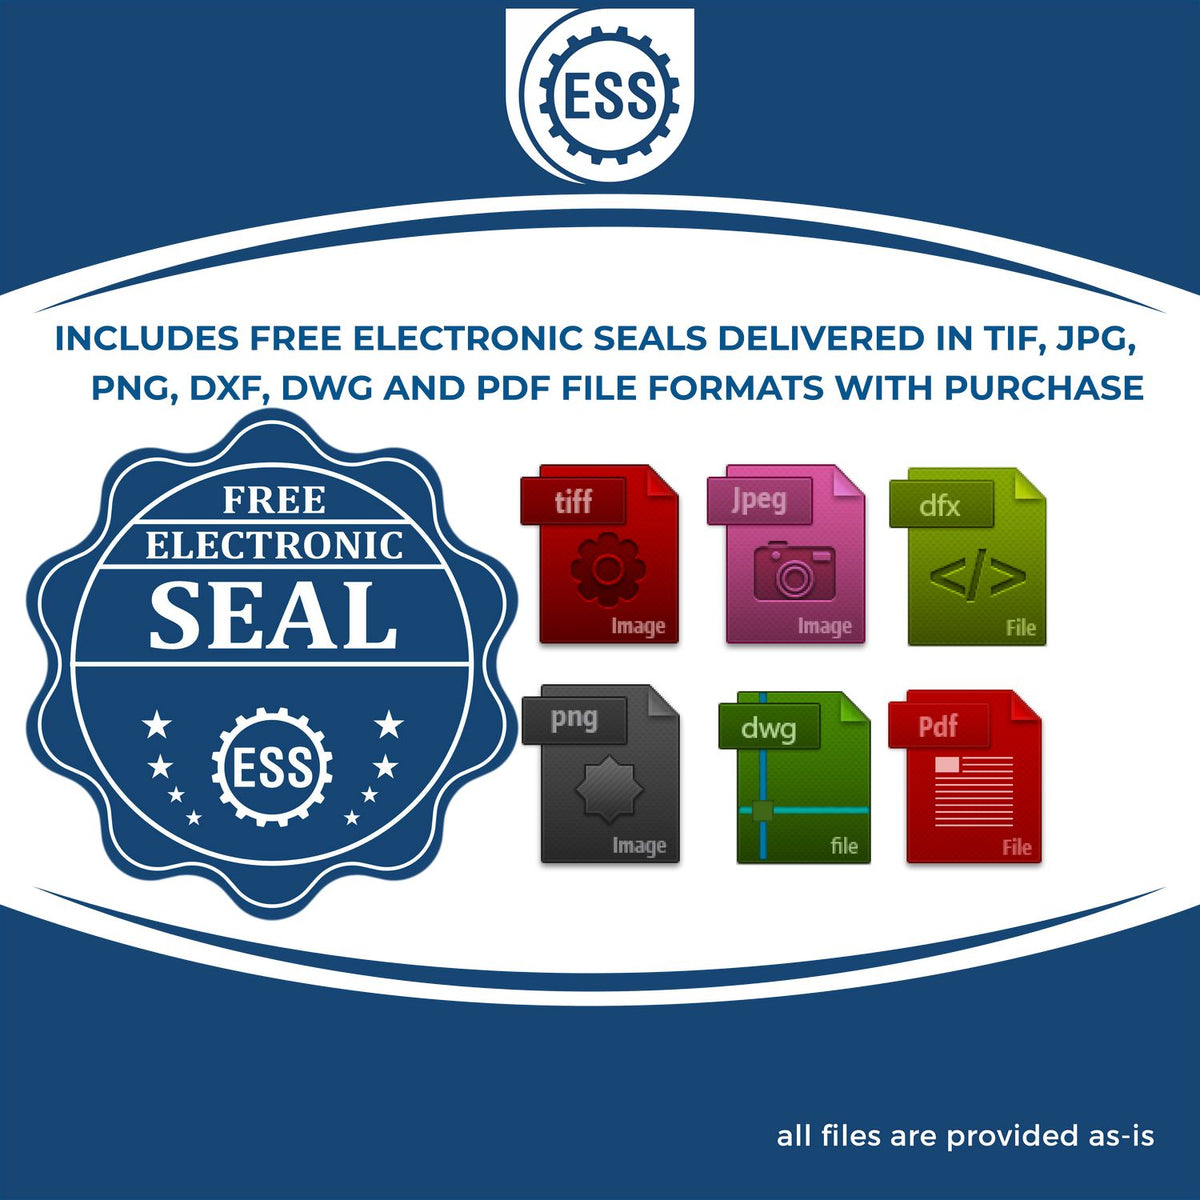 An infographic for the free electronic seal for the State of Maryland Extended Long Reach Geologist Seal illustrating the different file type icons such as DXF, DWG, TIF, JPG and PNG.